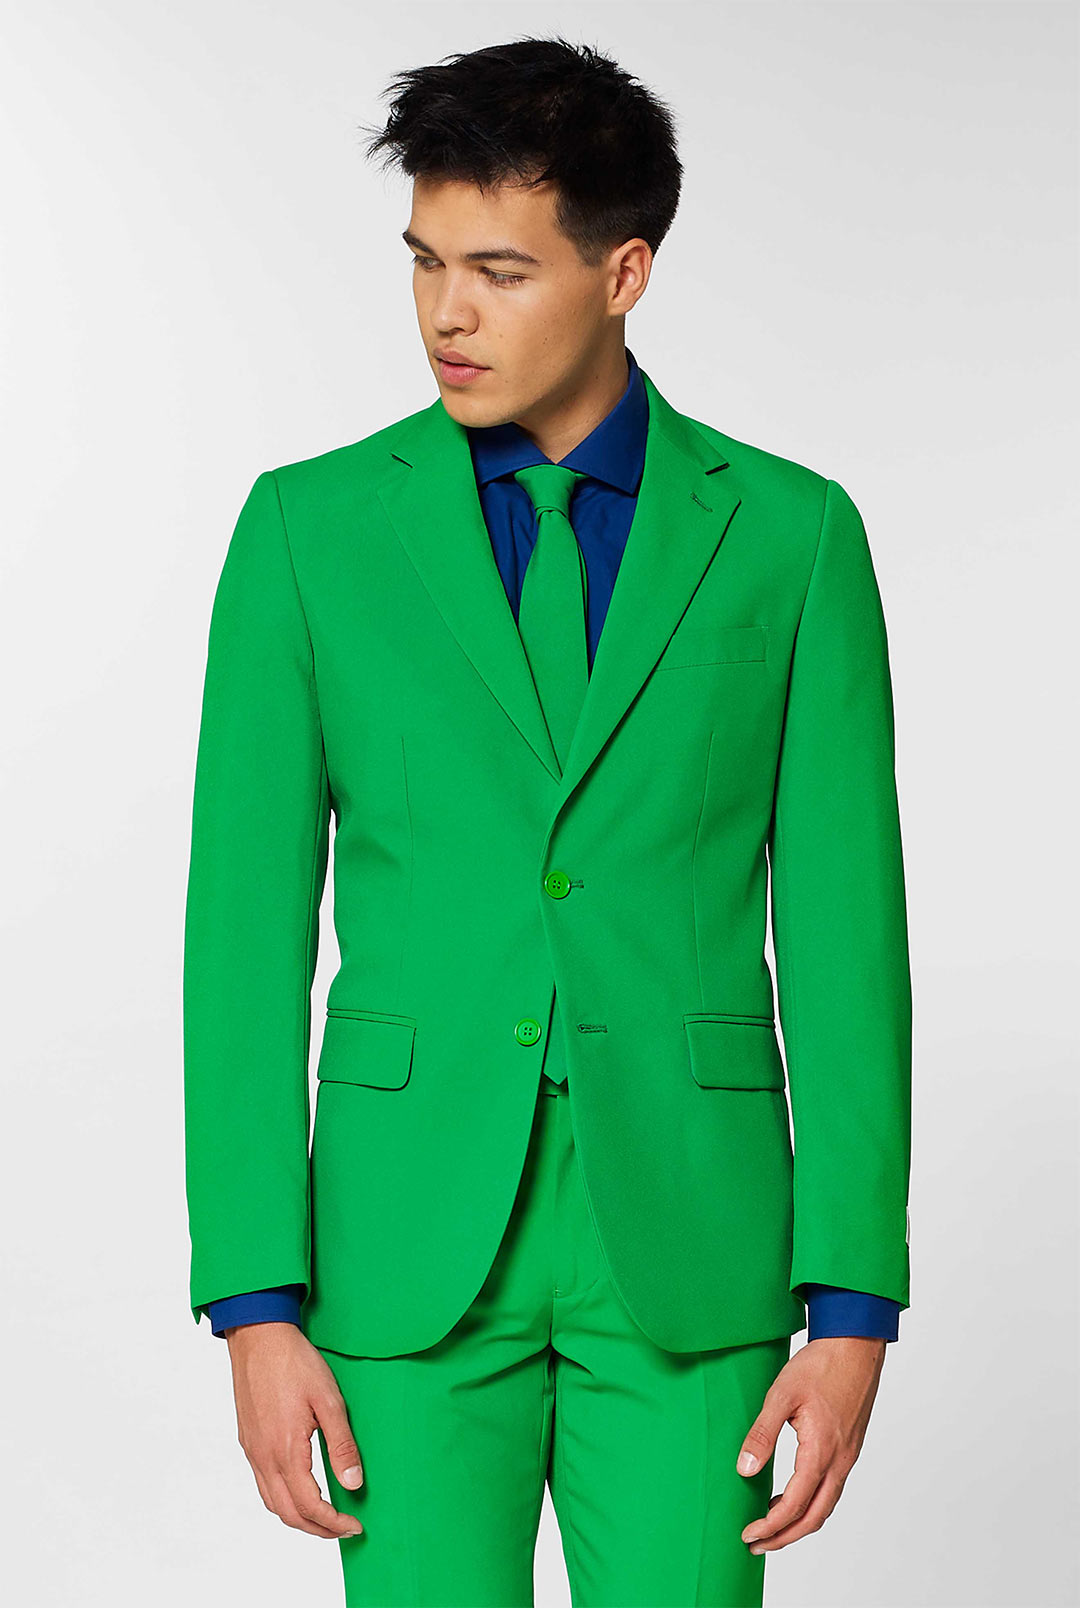 Look Unique and sharp with lime green three piece suit for men. | Green suit  men, Mens suits, Green suit jacket